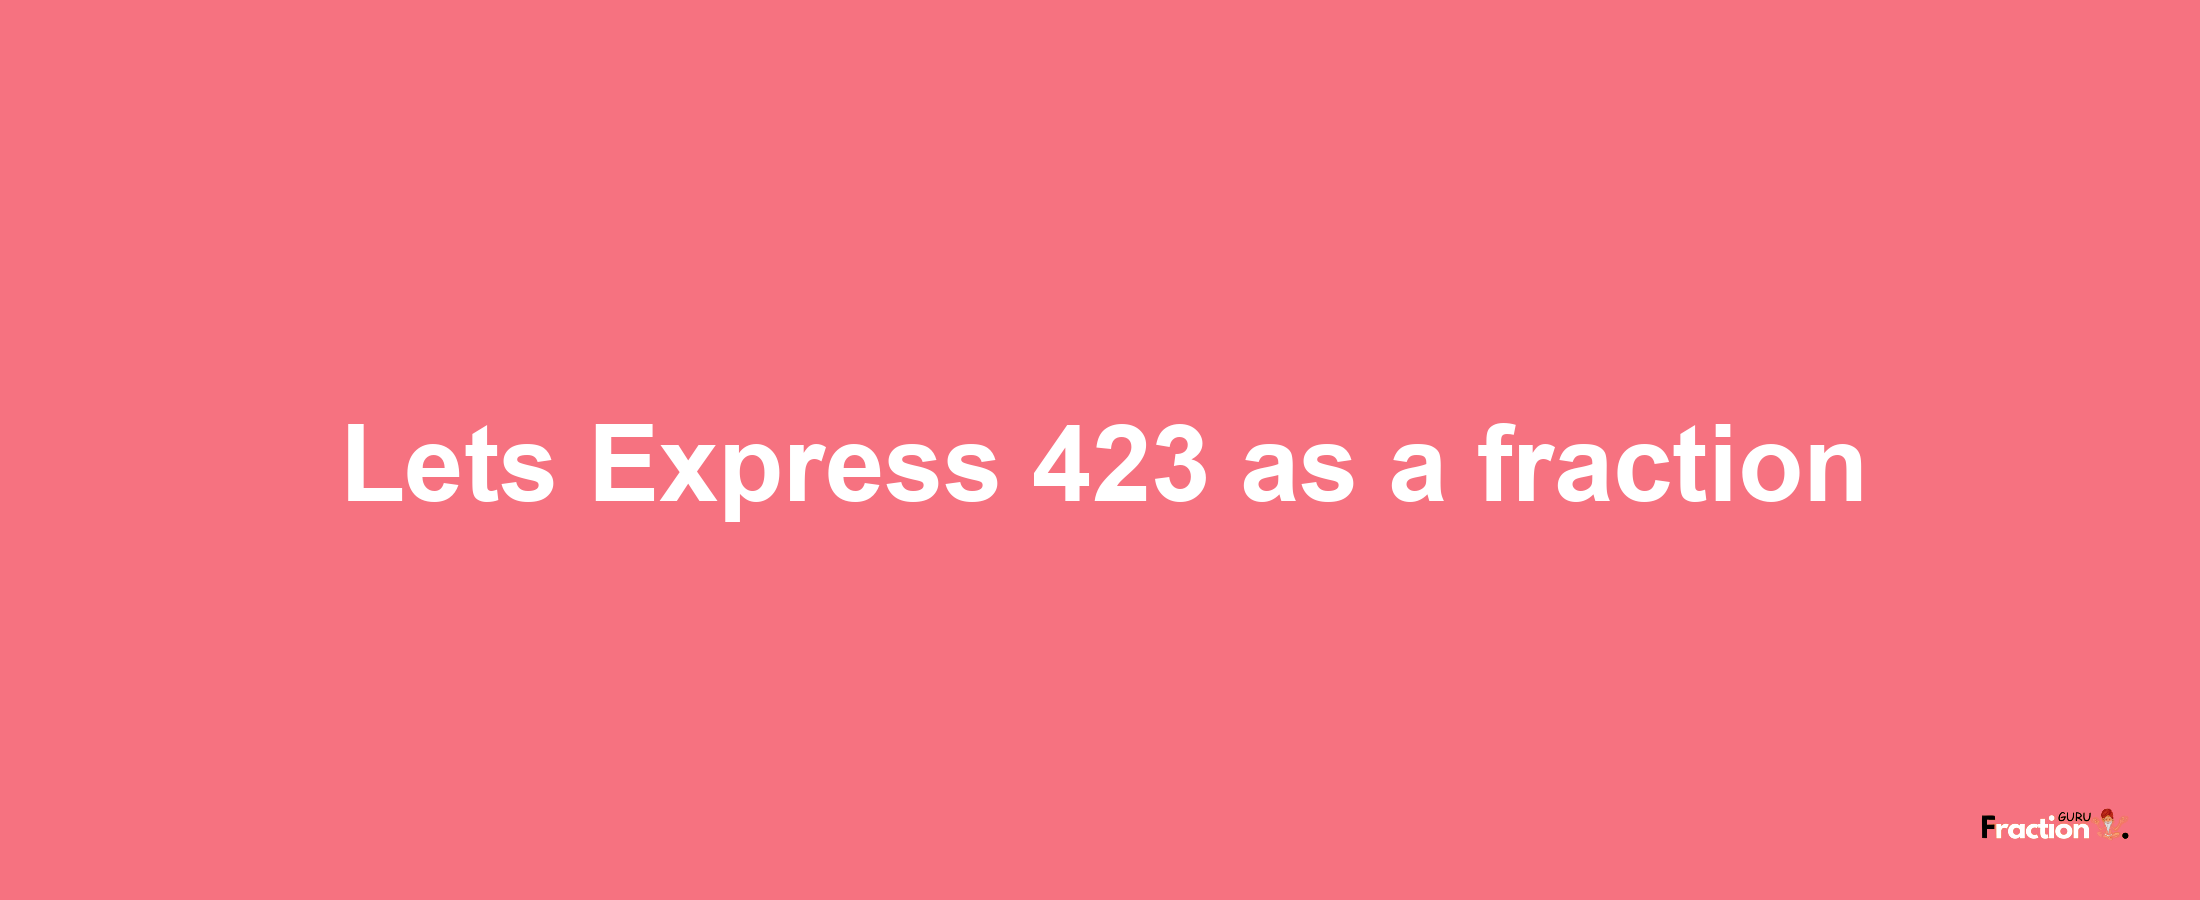 Lets Express 423 as afraction